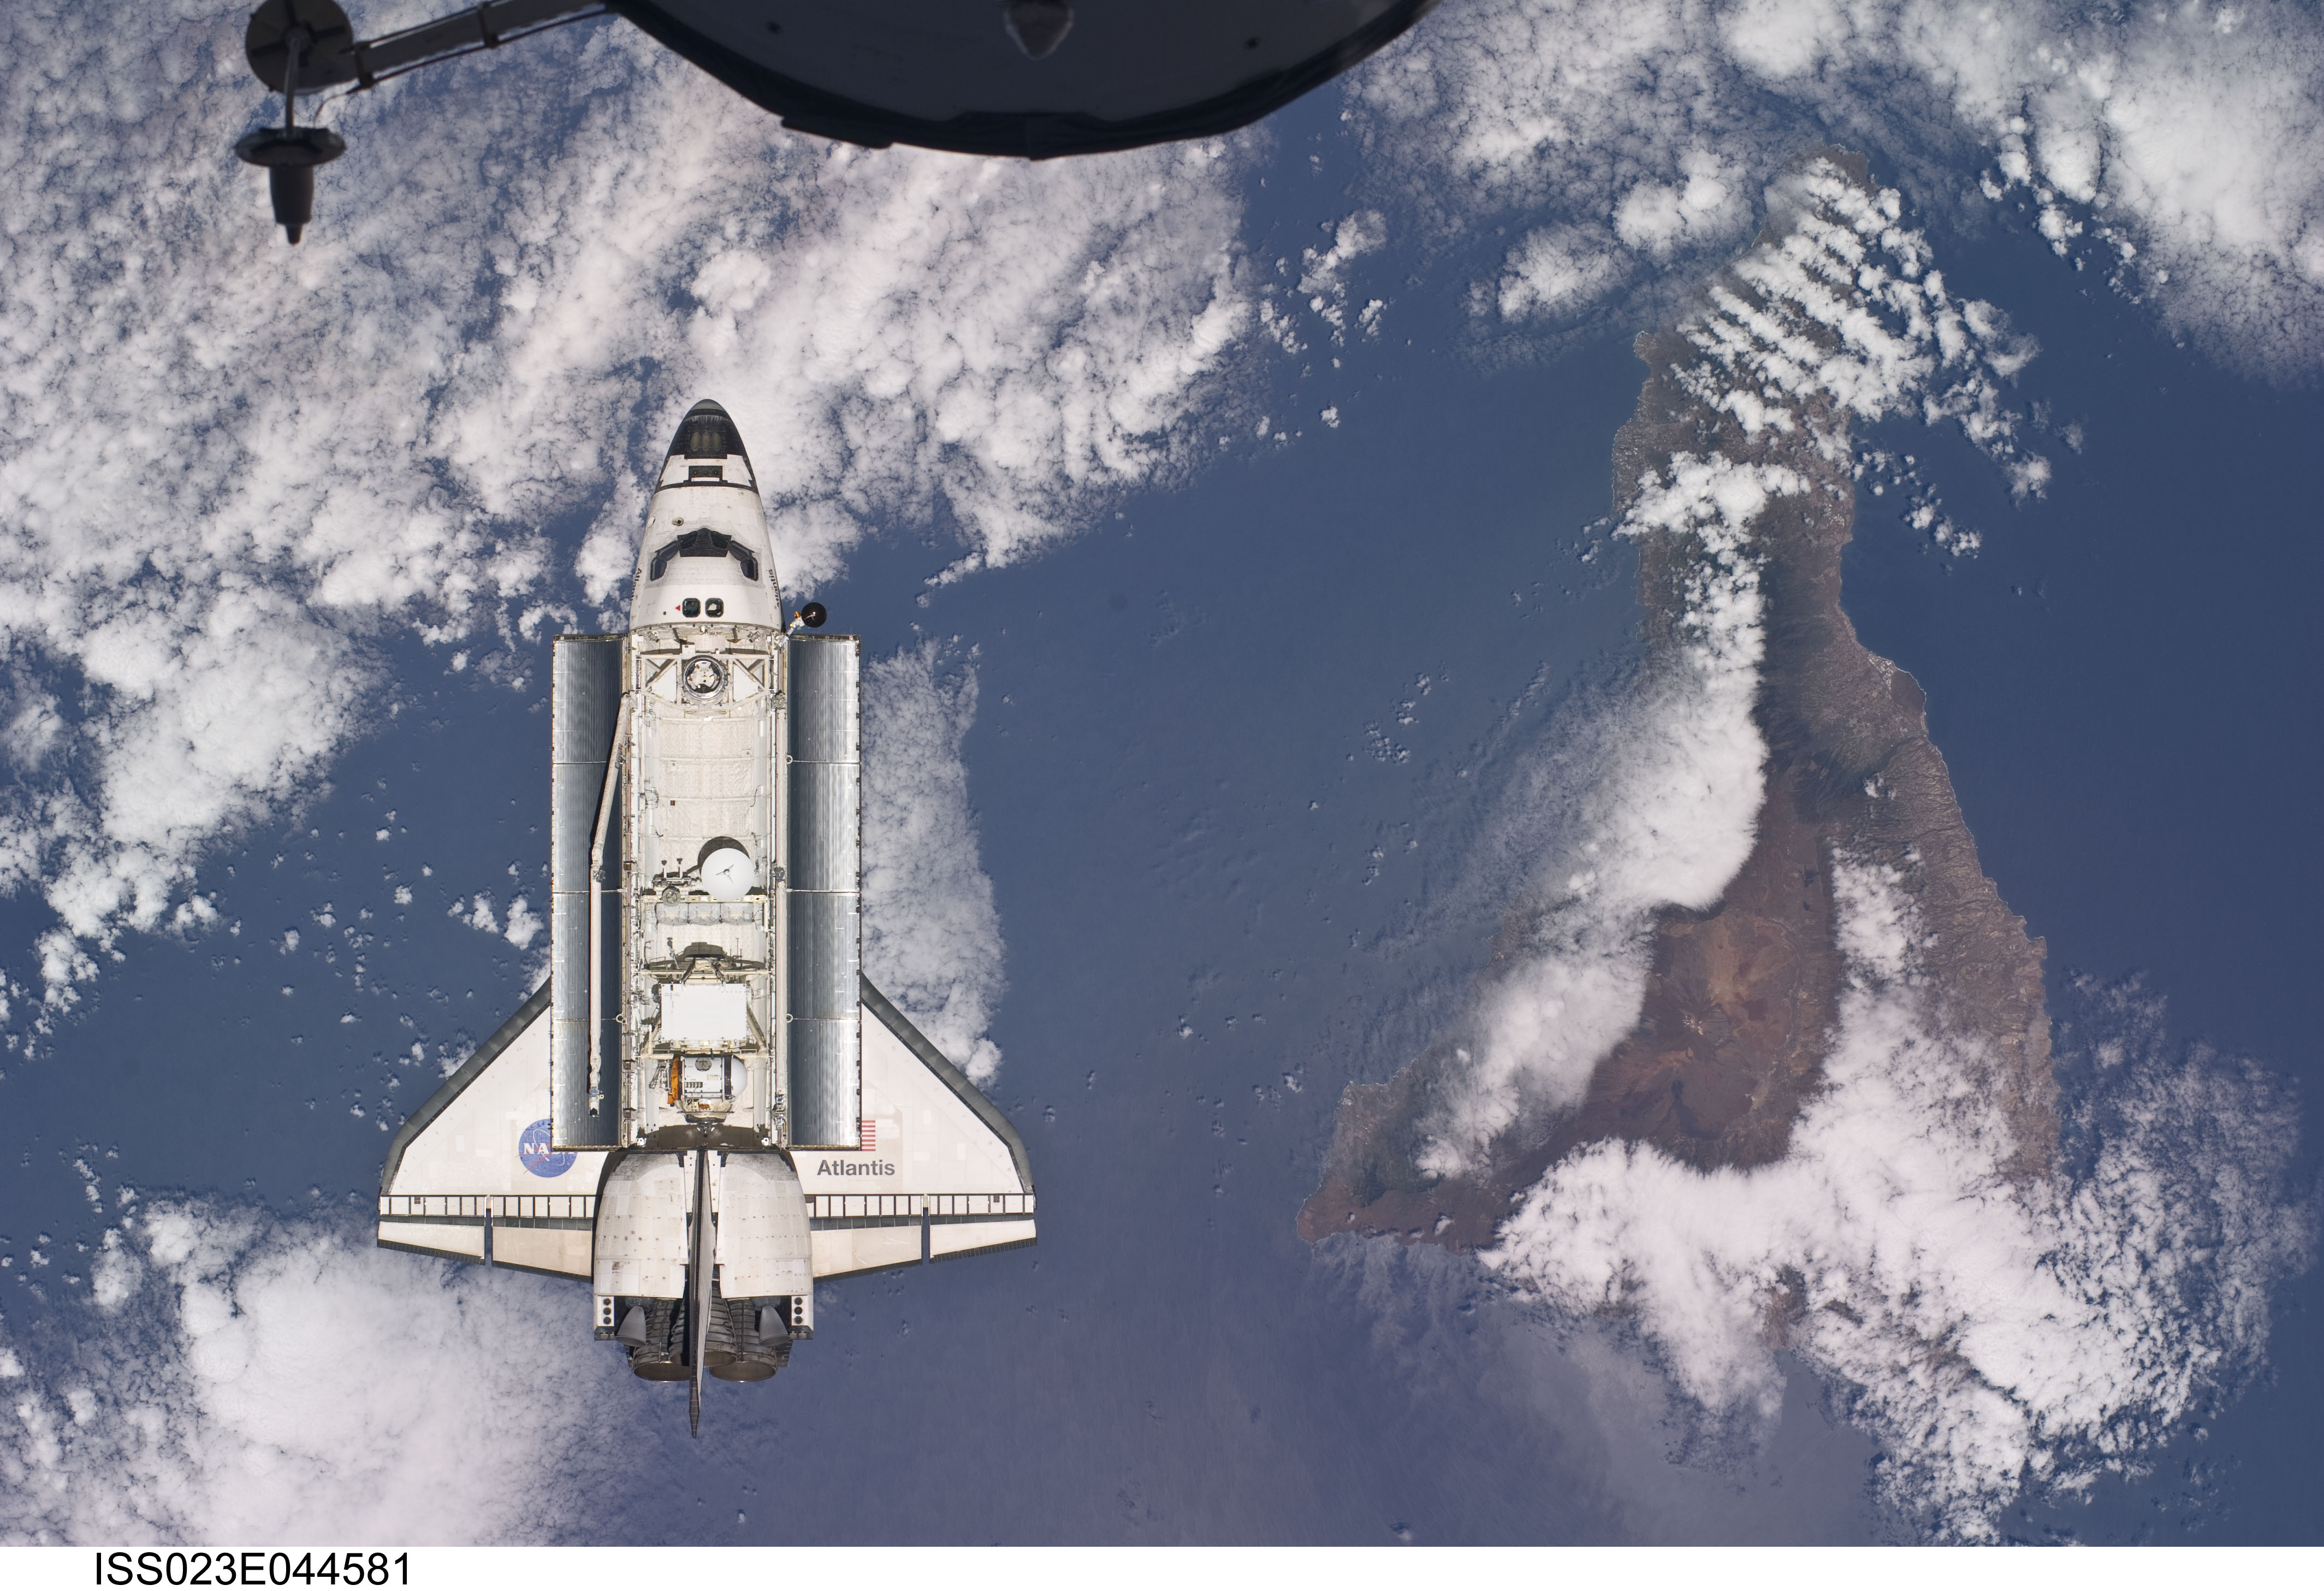 The space shuttle with Tenerife in the background